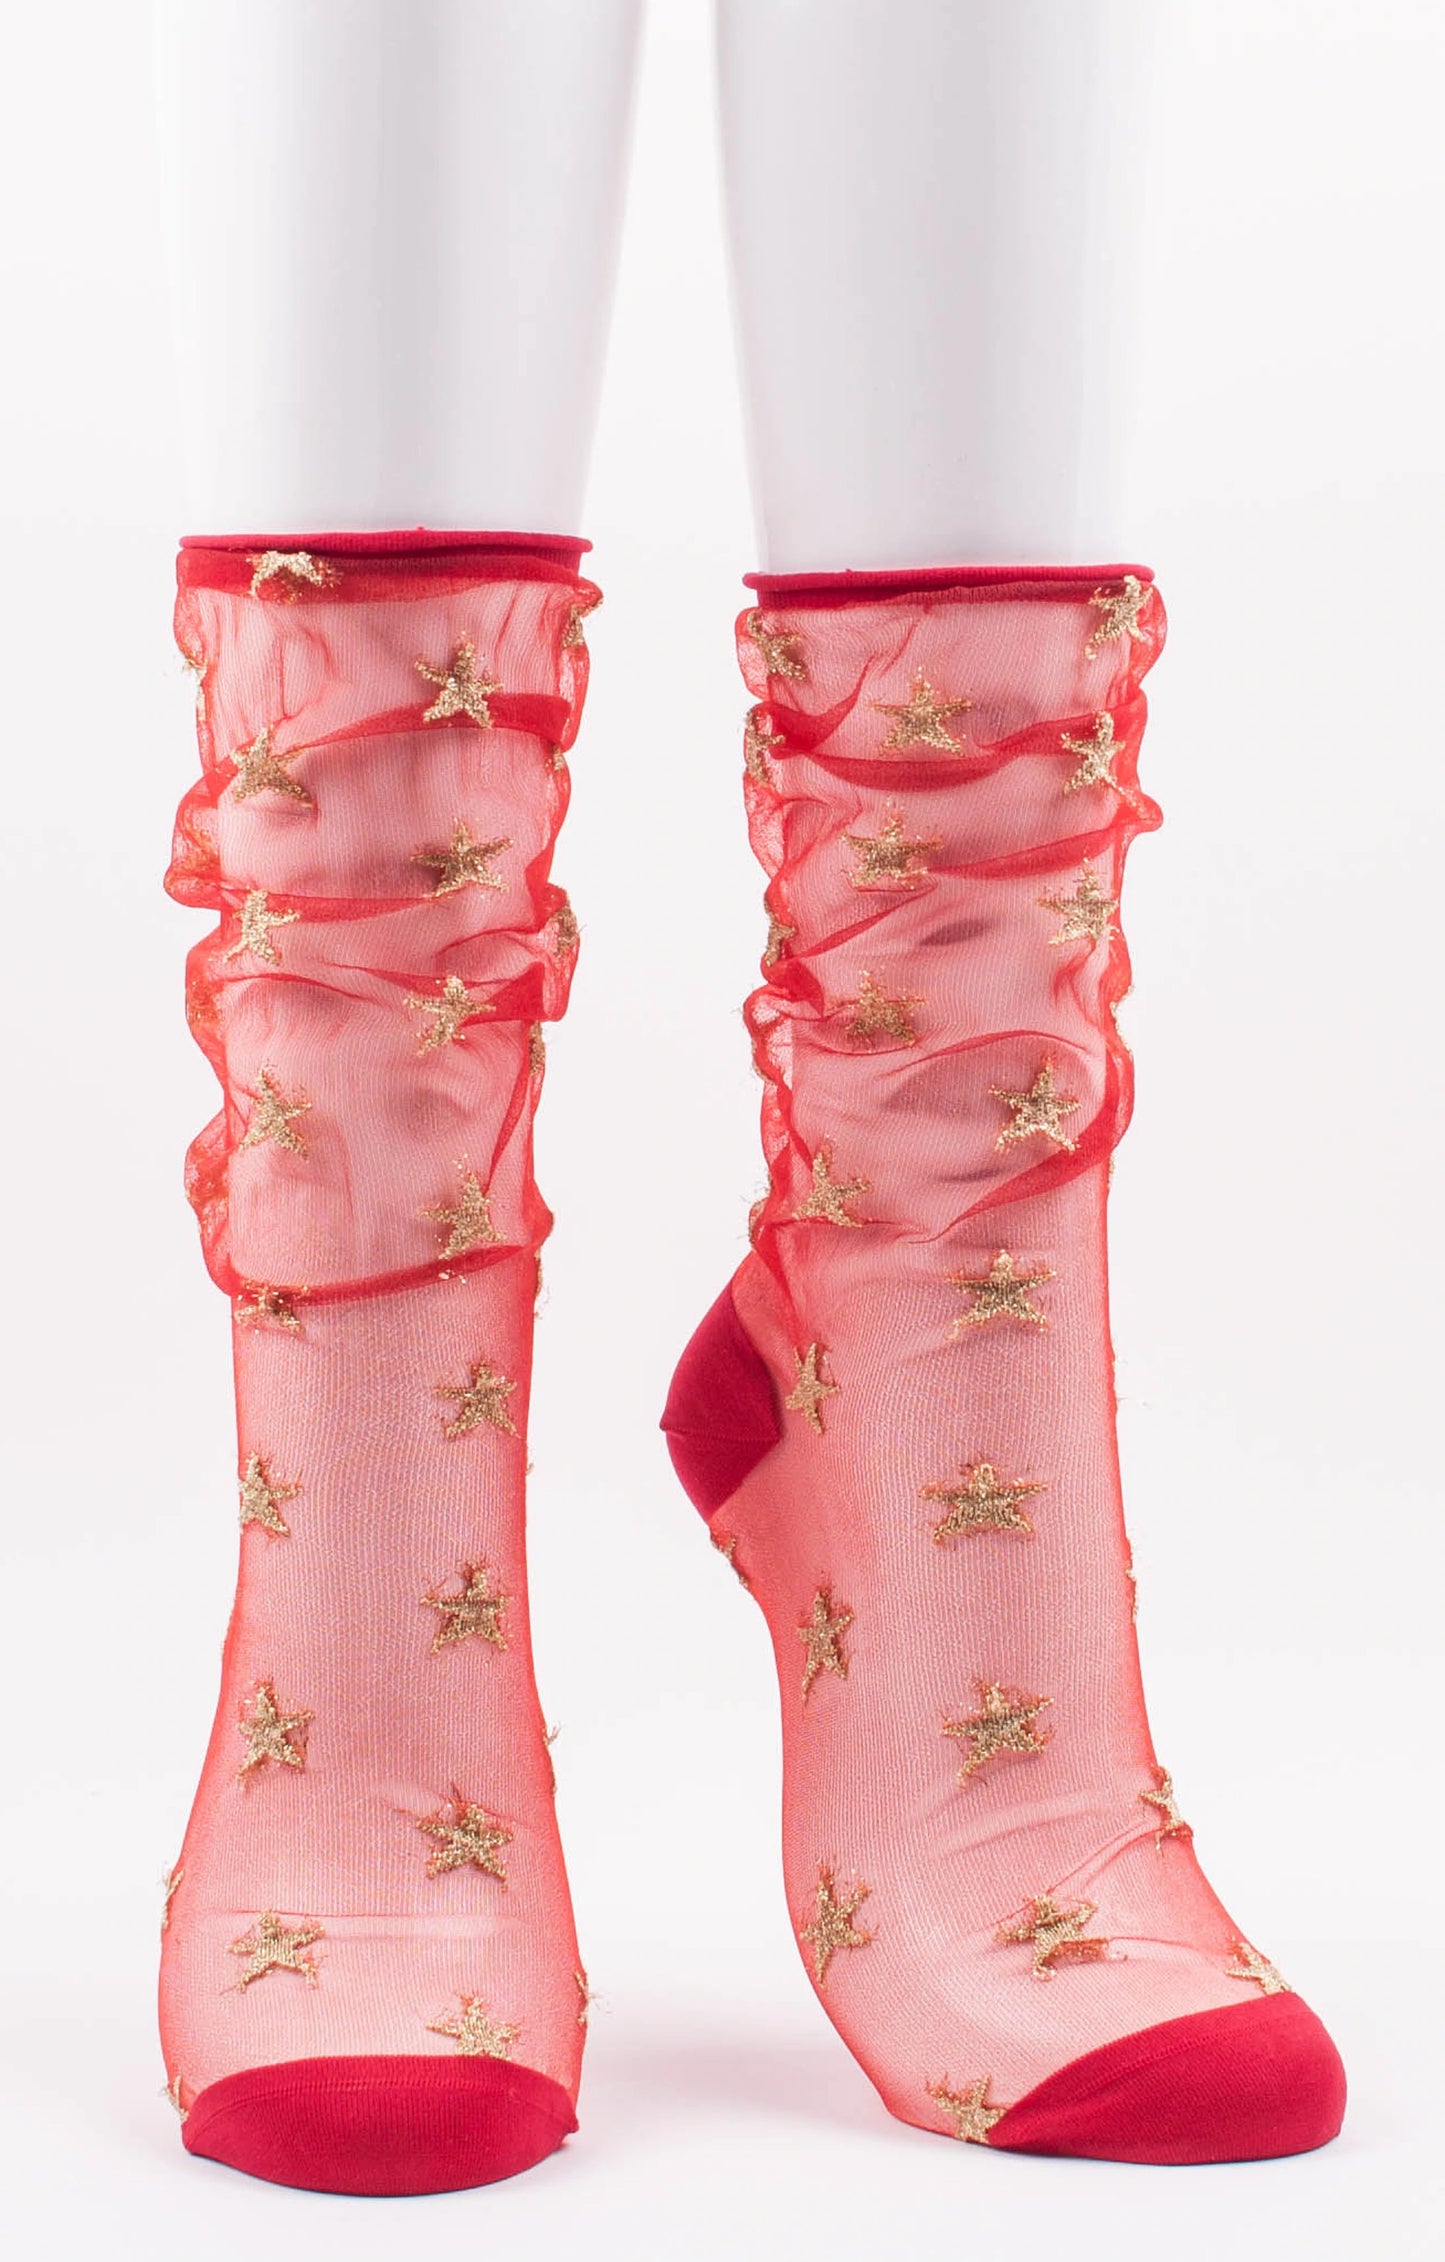 TABBISOCKS brand Sheer Star Tulle Socks in RED GOLD color with gold star embroidery scattered on transparent red fabric design